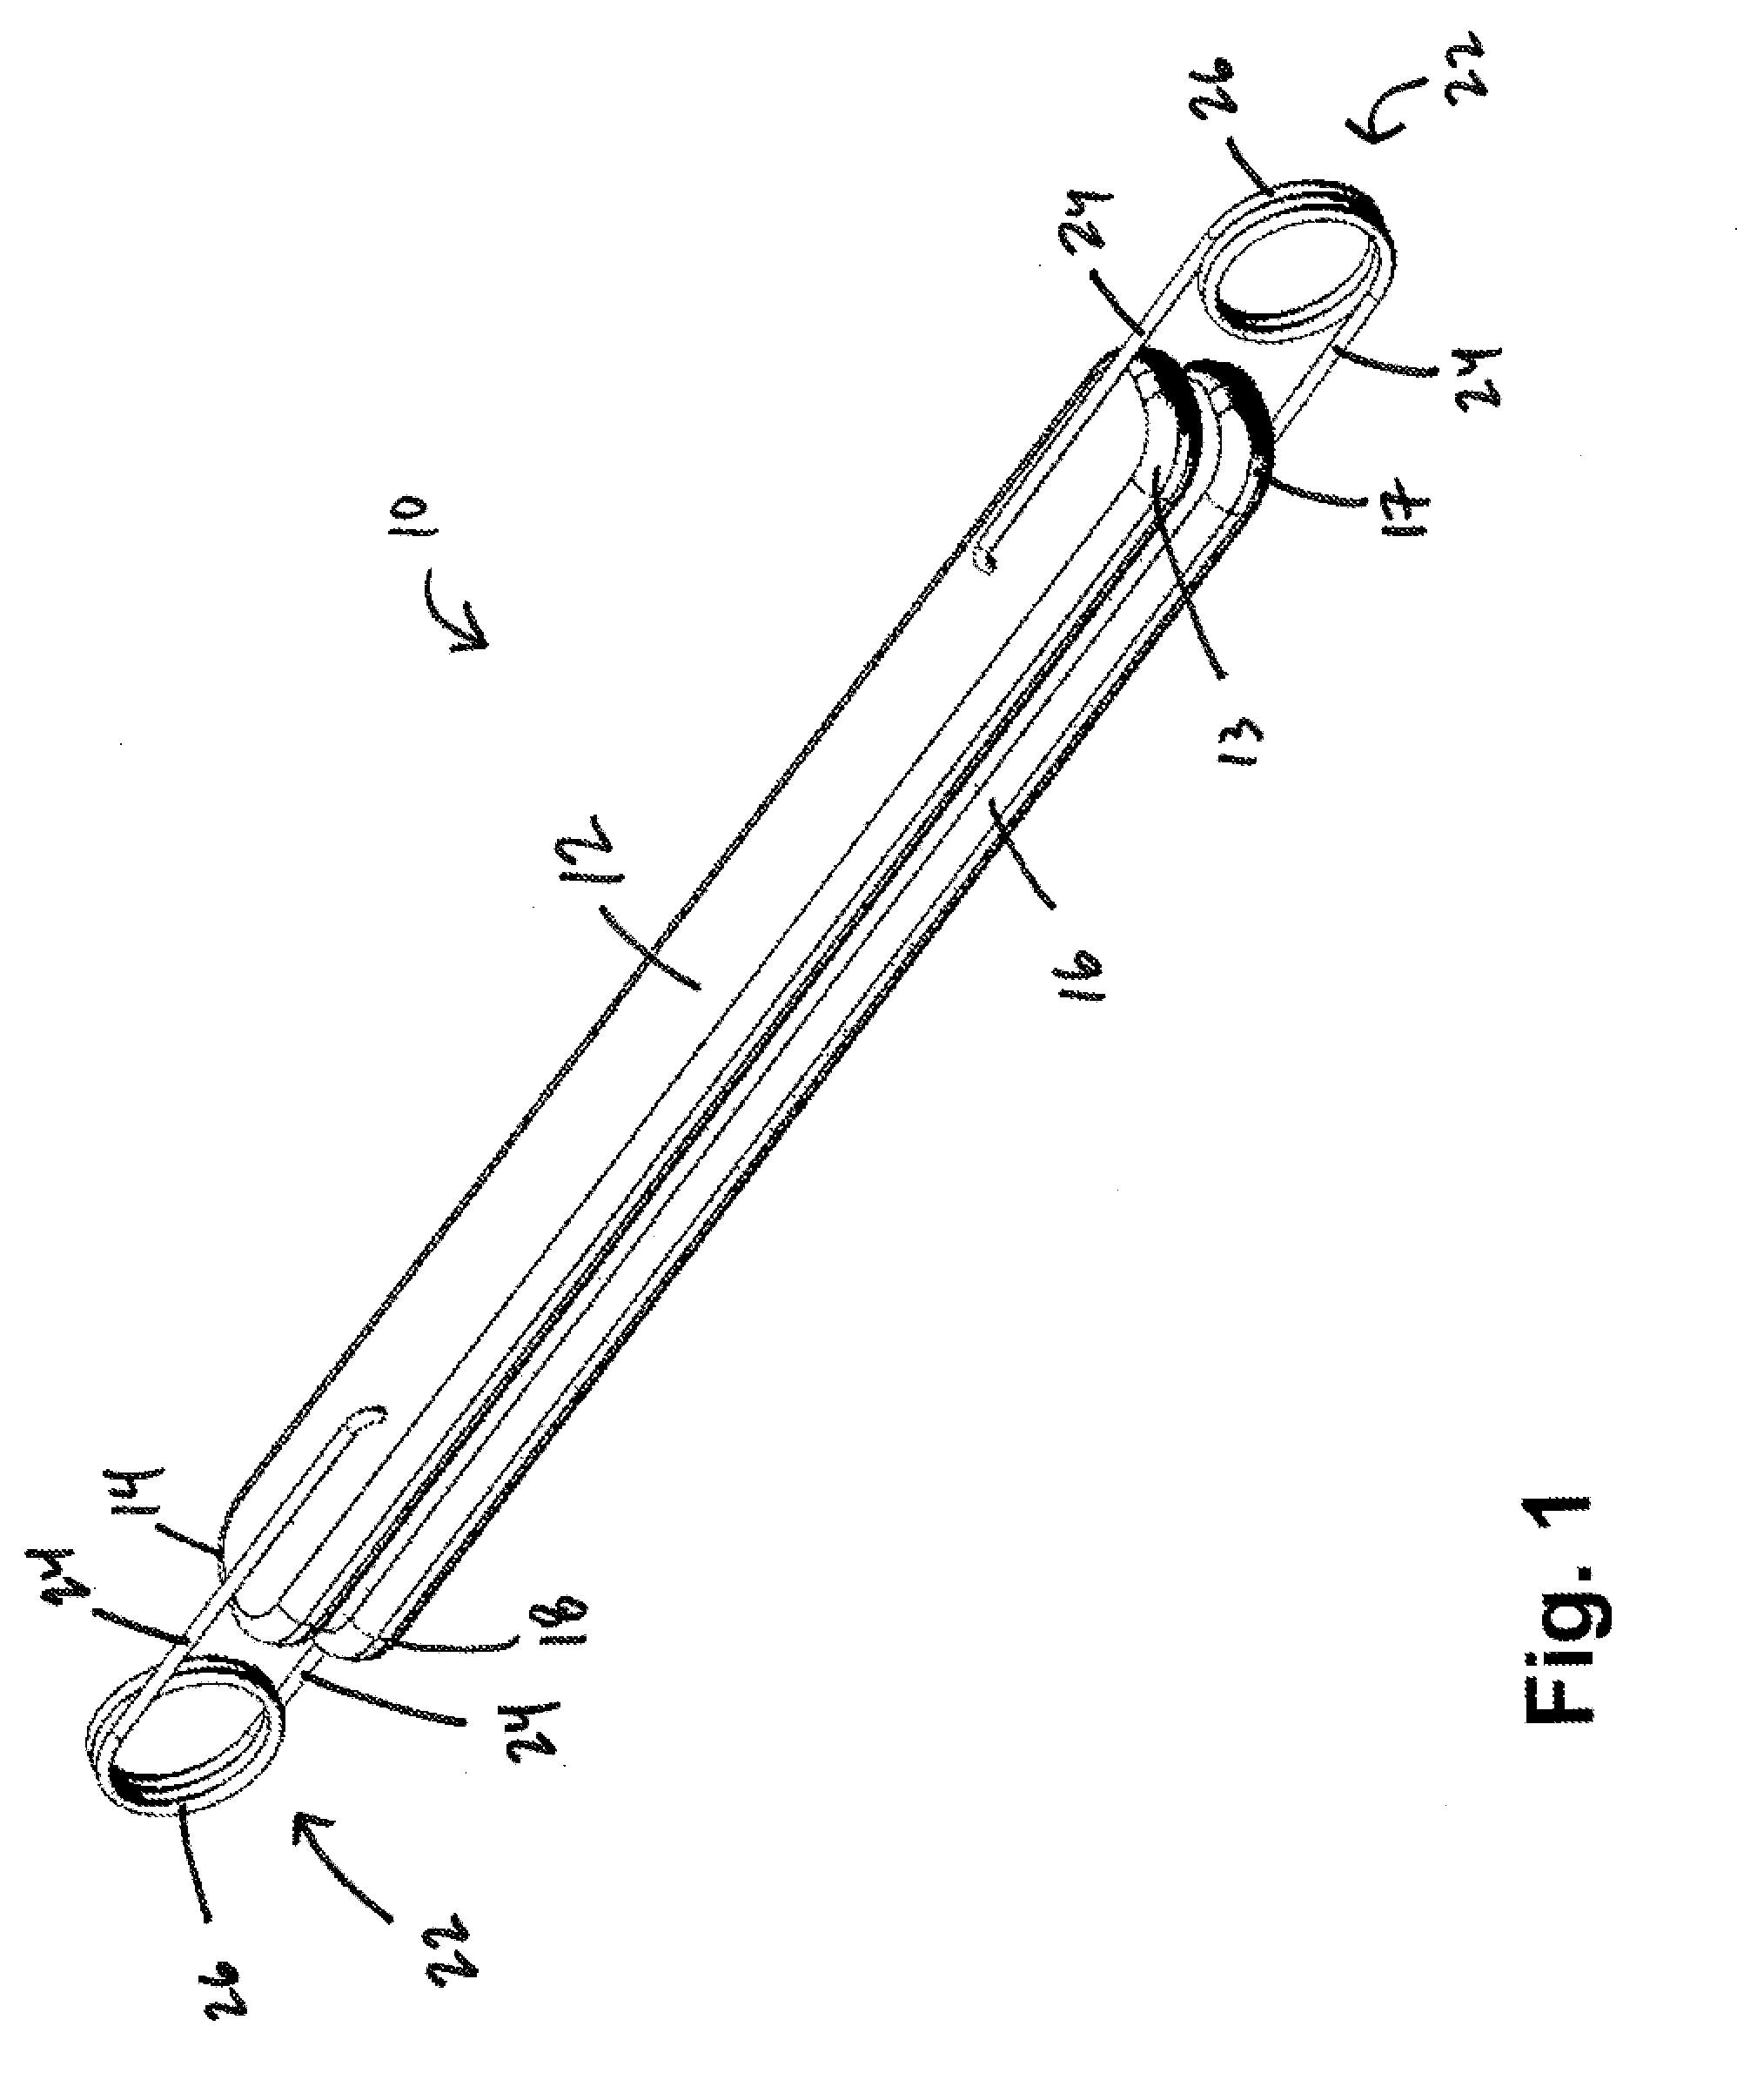 Devices, systems and methods for tissue restoration